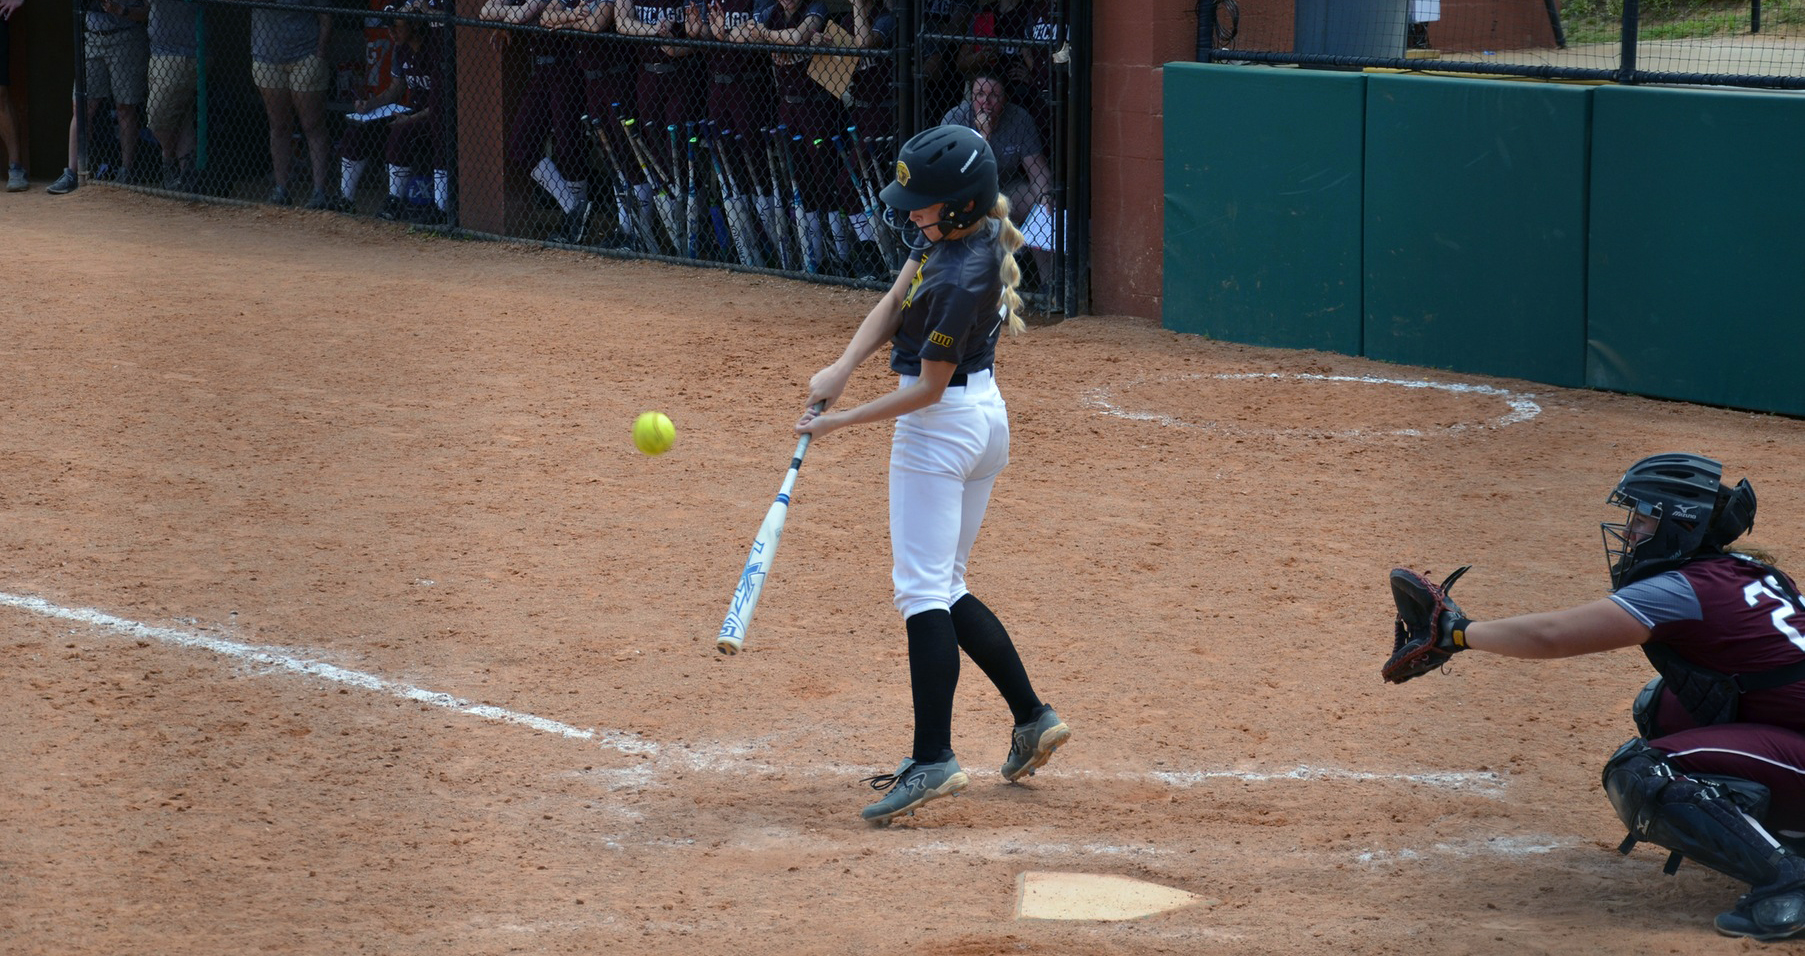 Bailey Smaney won both games of the doubleheader against the Maroons in the pitcher's circle and collected her first career hit and run batted in at the plate.